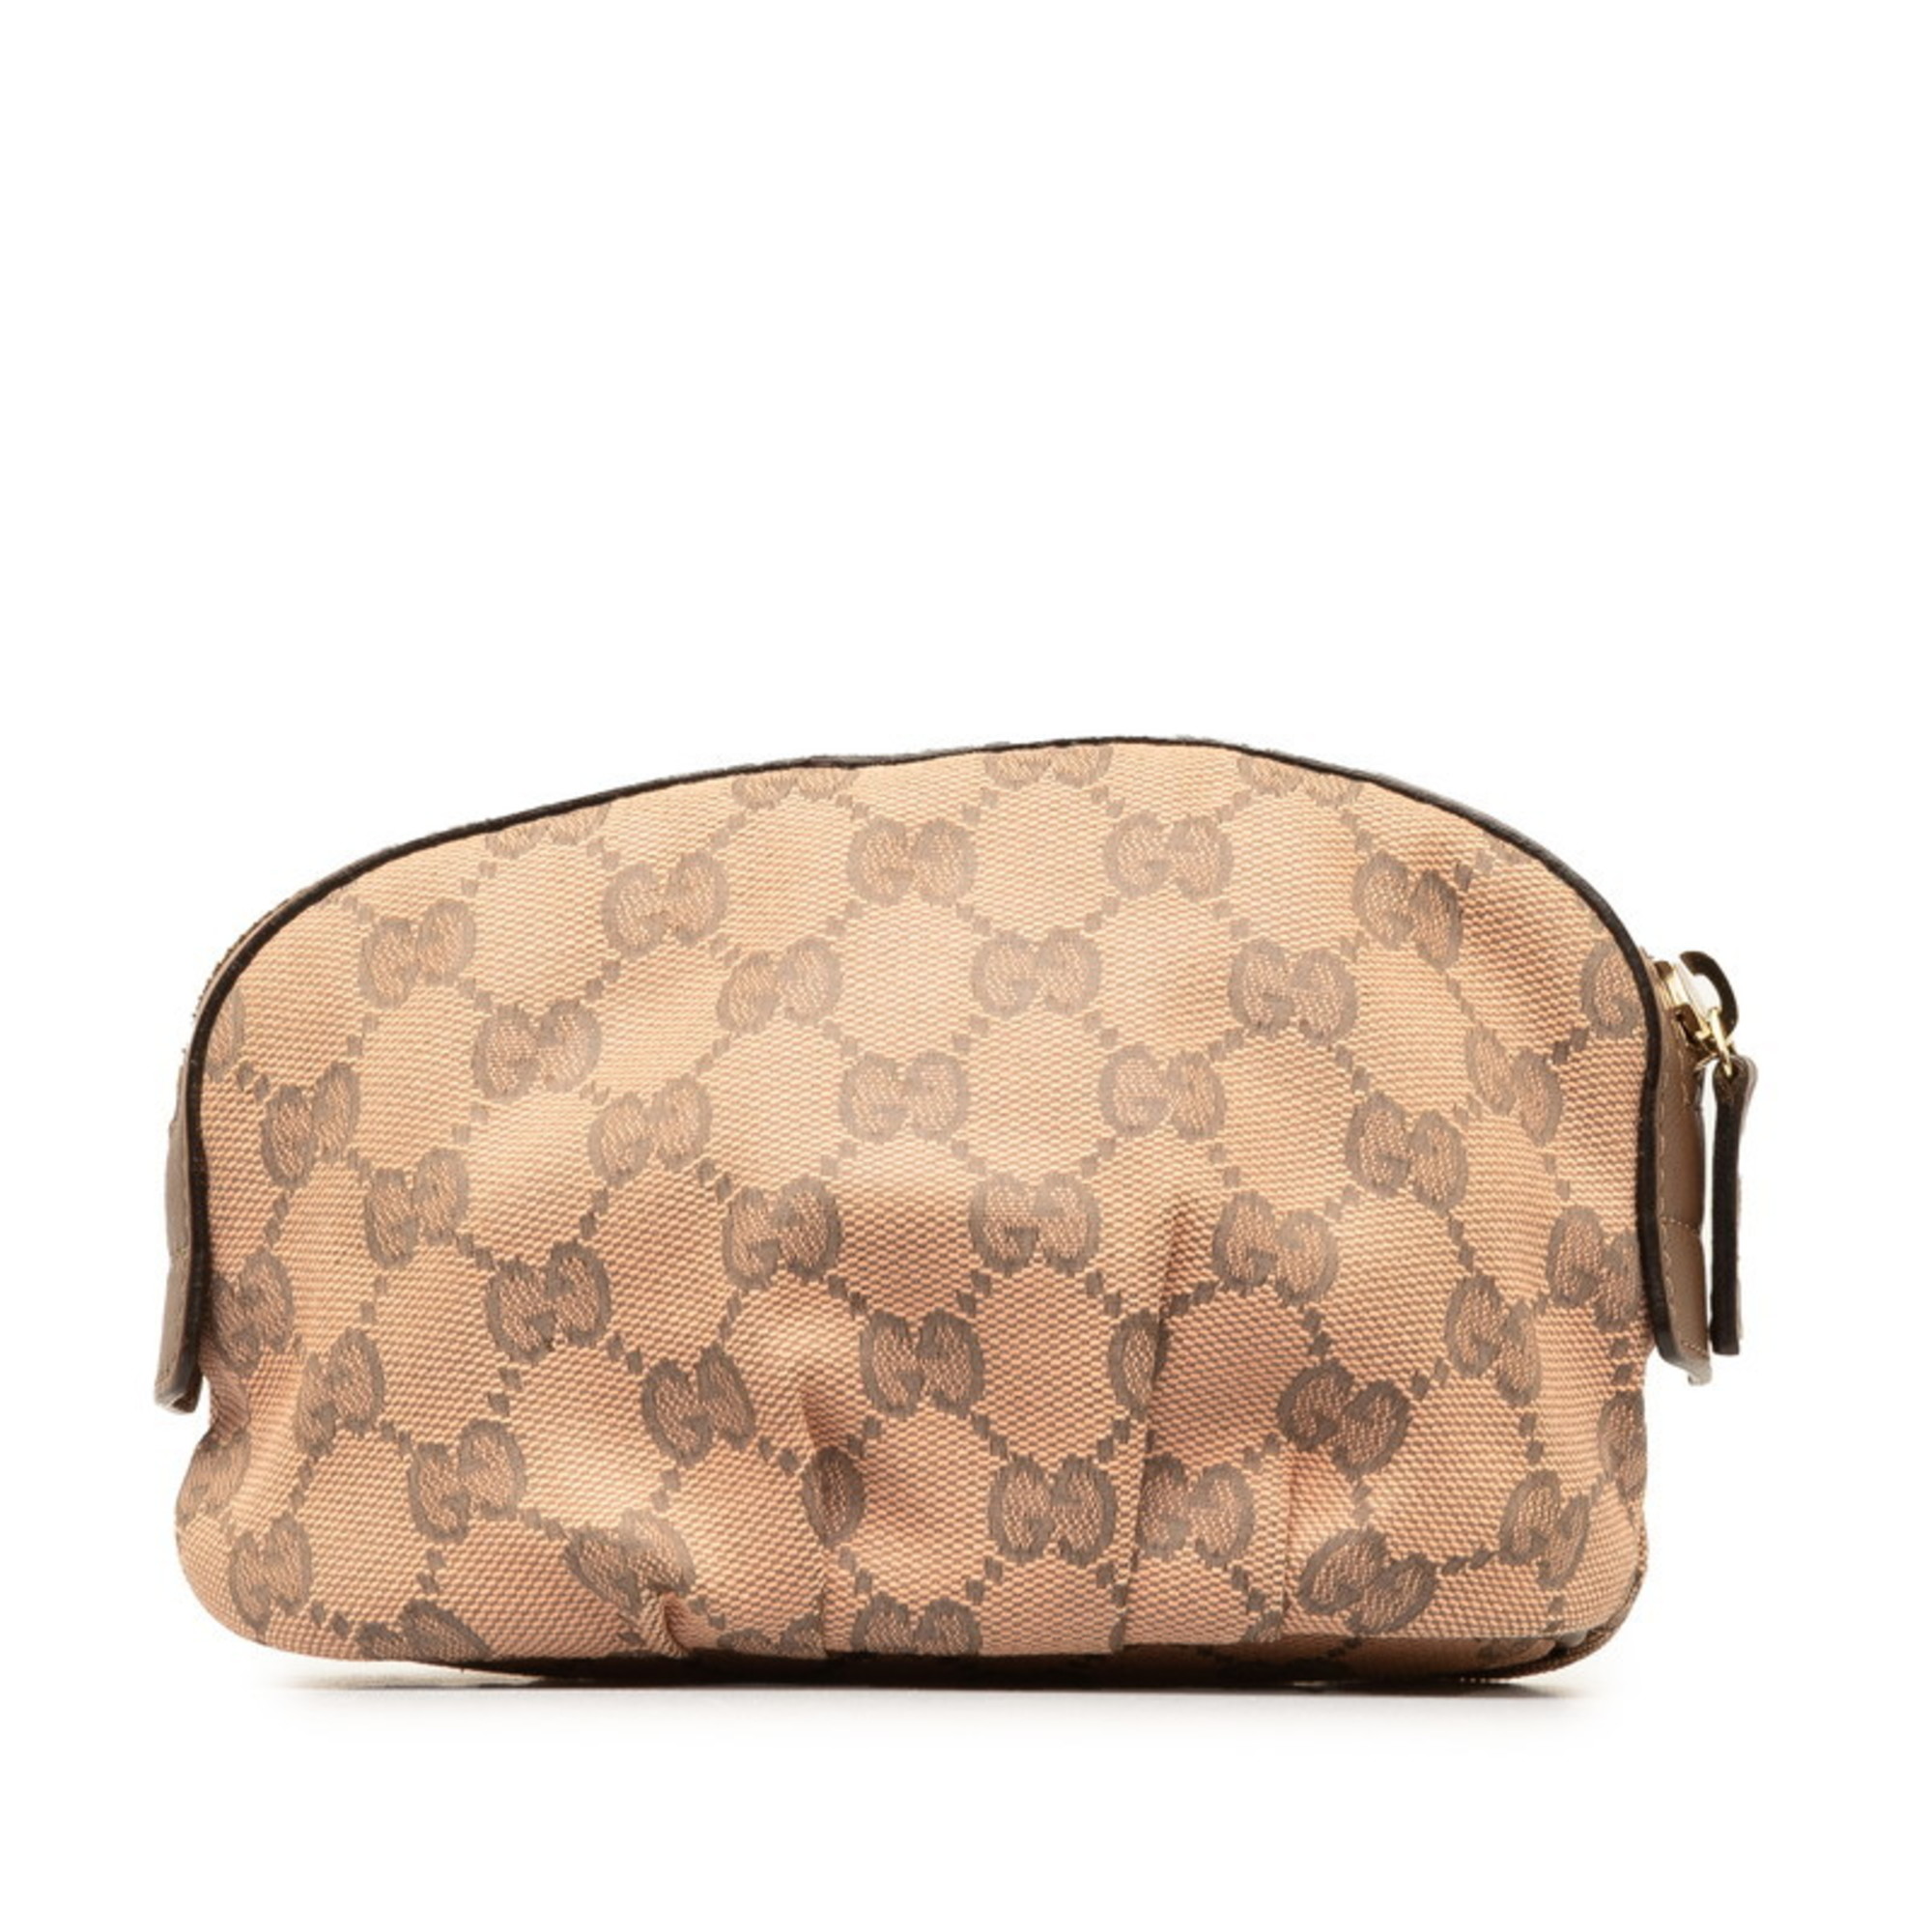 Gucci Interlocking G GG Canvas Pouch 308631 Pink Brown Leather Women's GUCCI